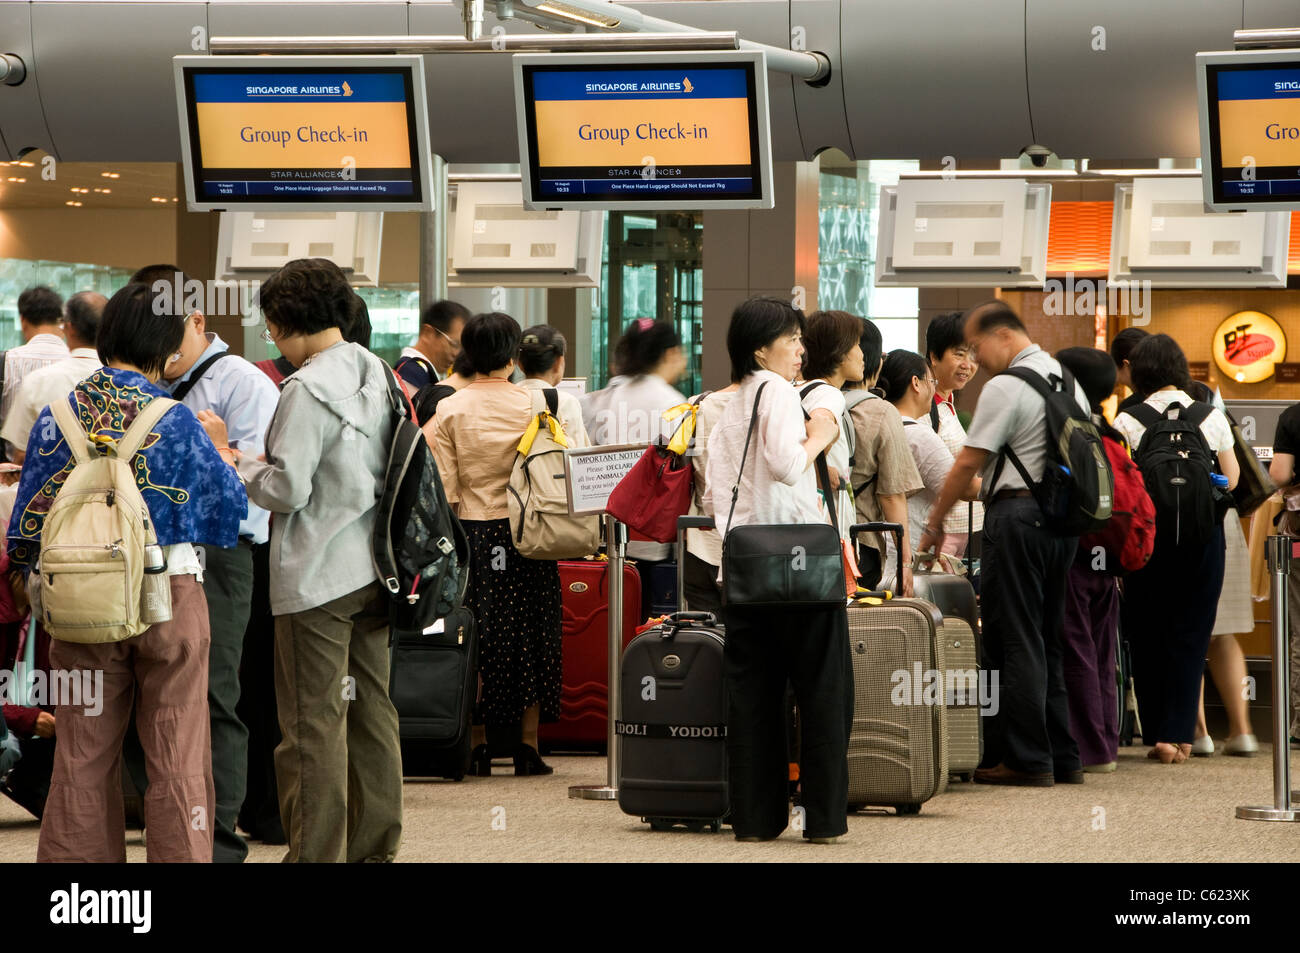 Singapore Airlines group check-in counters, departure hall at Changi Airport Terminal 3, Singapore Stock Photo